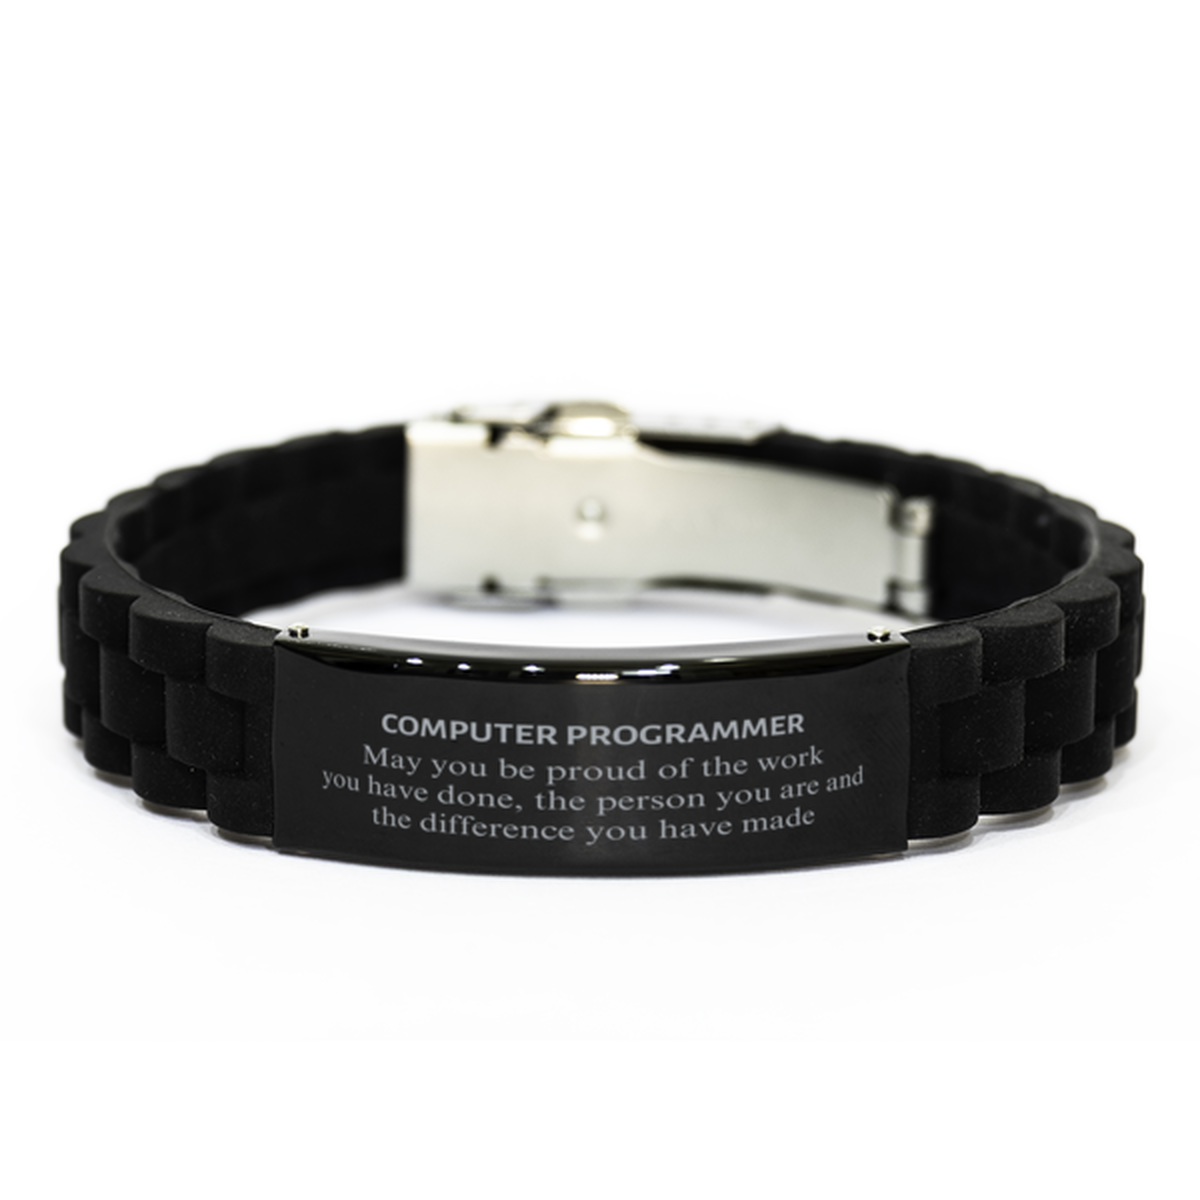 Computer Programmer May you be proud of the work you have done, Retirement Computer Programmer Black Glidelock Clasp Bracelet for Colleague Appreciation Gifts Amazing for Computer Programmer